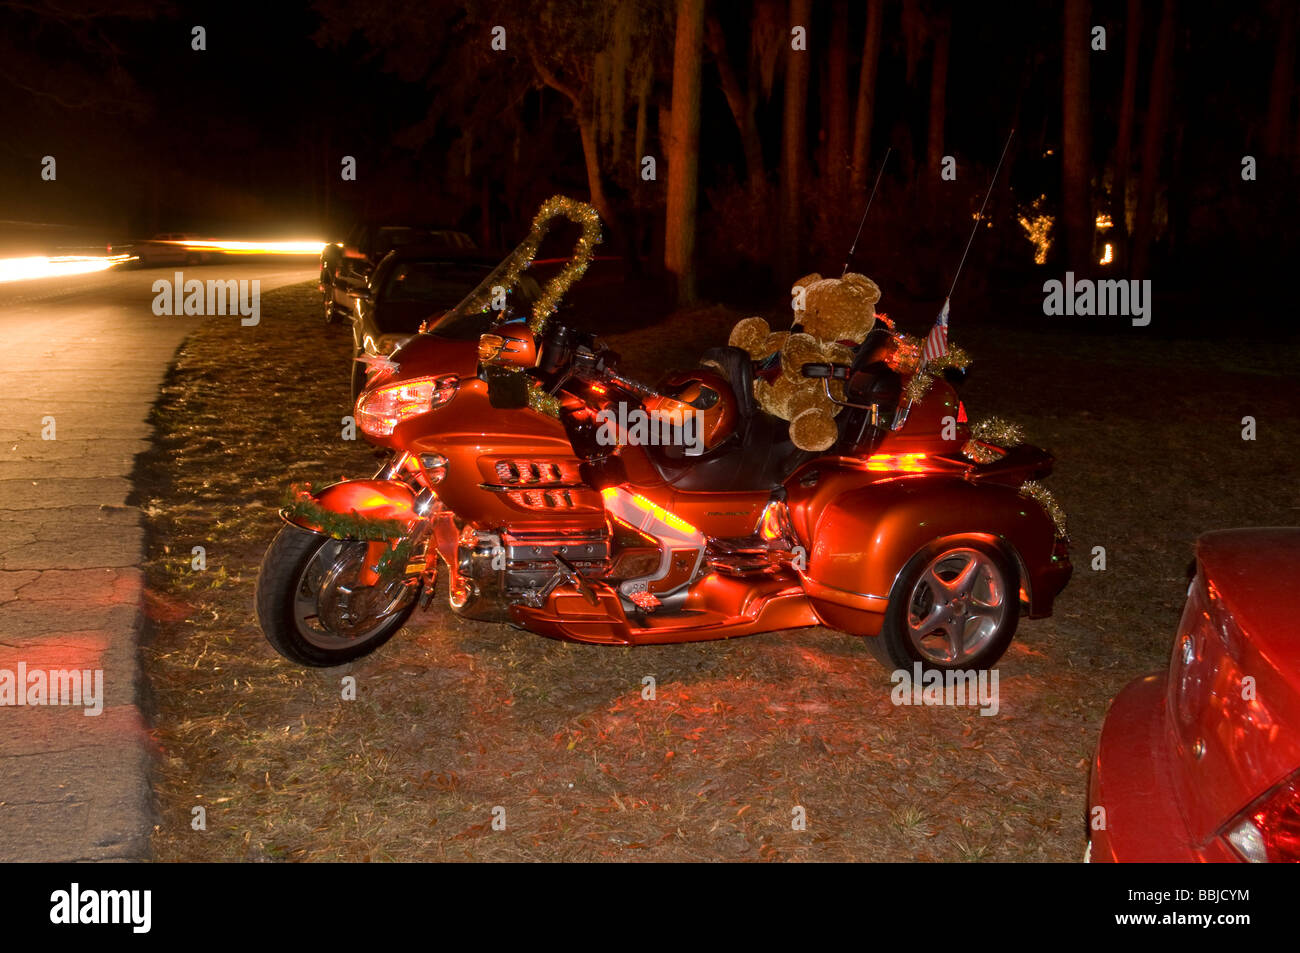 Motorcycle decorated for Christmas at Festival of Lights Stephen Foster Folk Culture Center State Park White Springs Florida Stock Photo